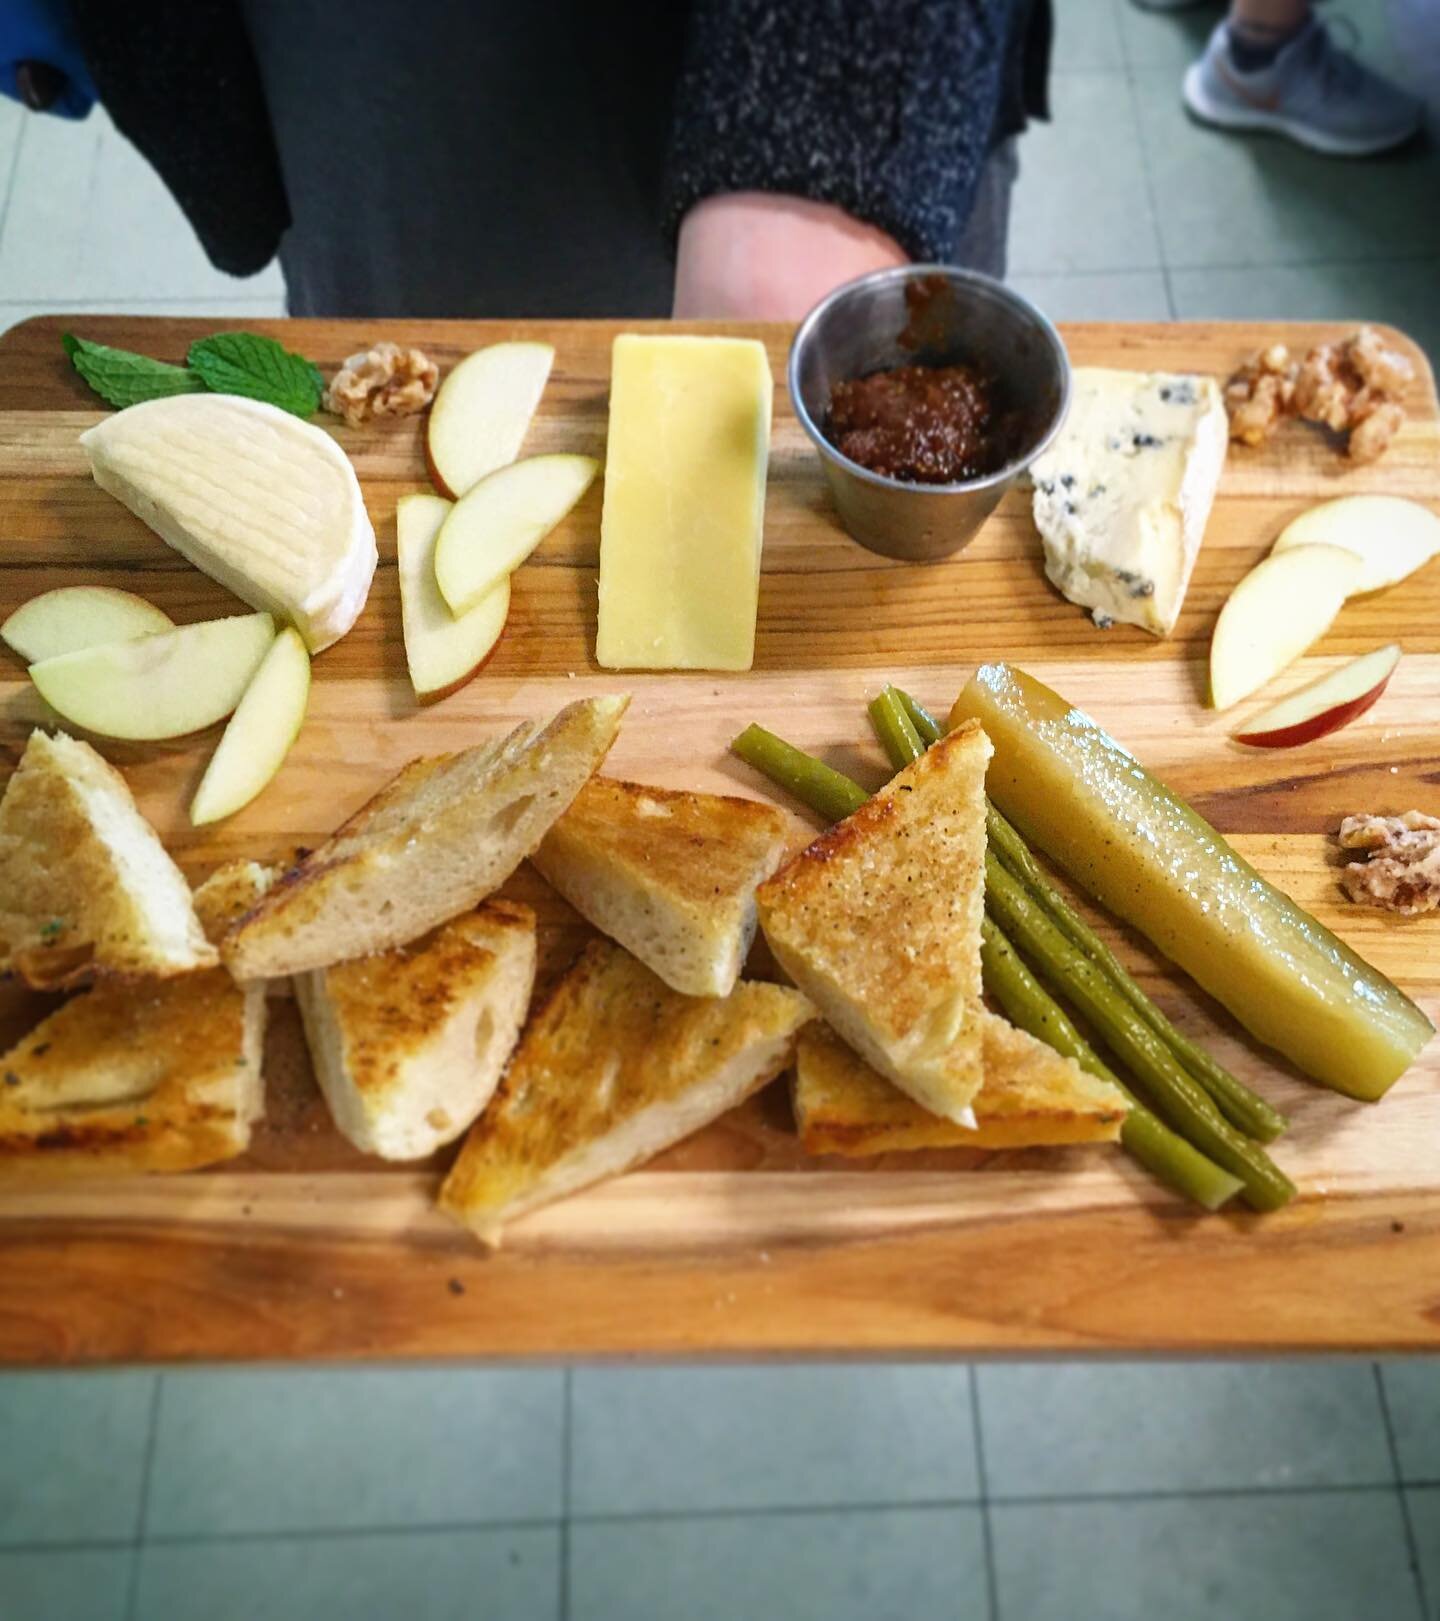 Wine Down Wednesday at the Drake now features a local VT cheese board with rotating items (only $12 today)! This week we have jam and pickled fiddleheads from @boneyardfarm we can&rsquo;t wait for you to try them 🥂🌿#warmupandwinedown #cheers #chees